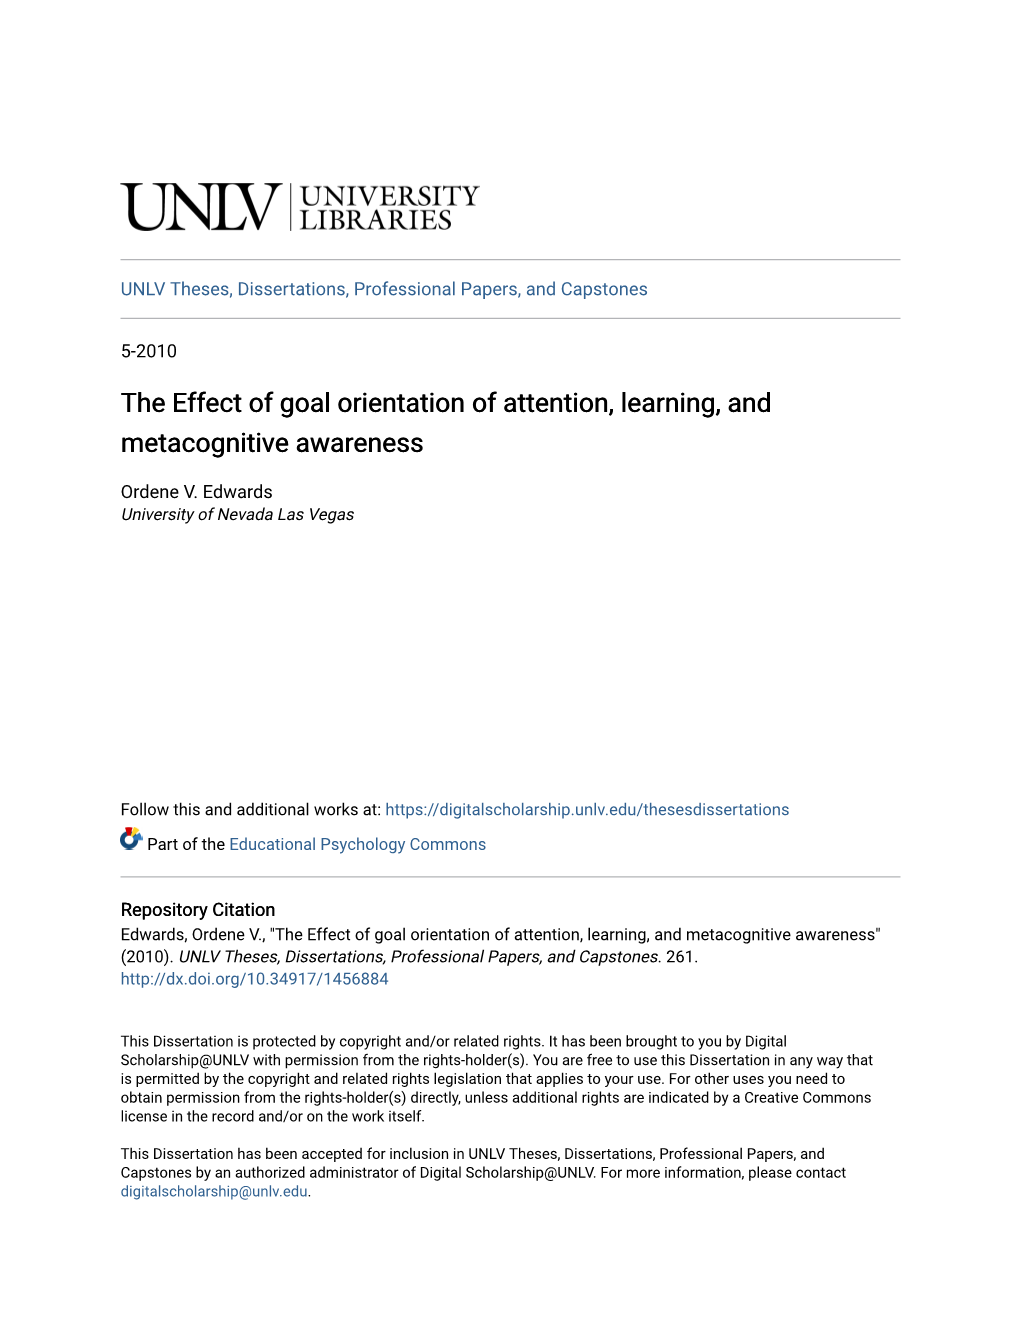 The Effect of Goal Orientation of Attention, Learning, and Metacognitive Awareness